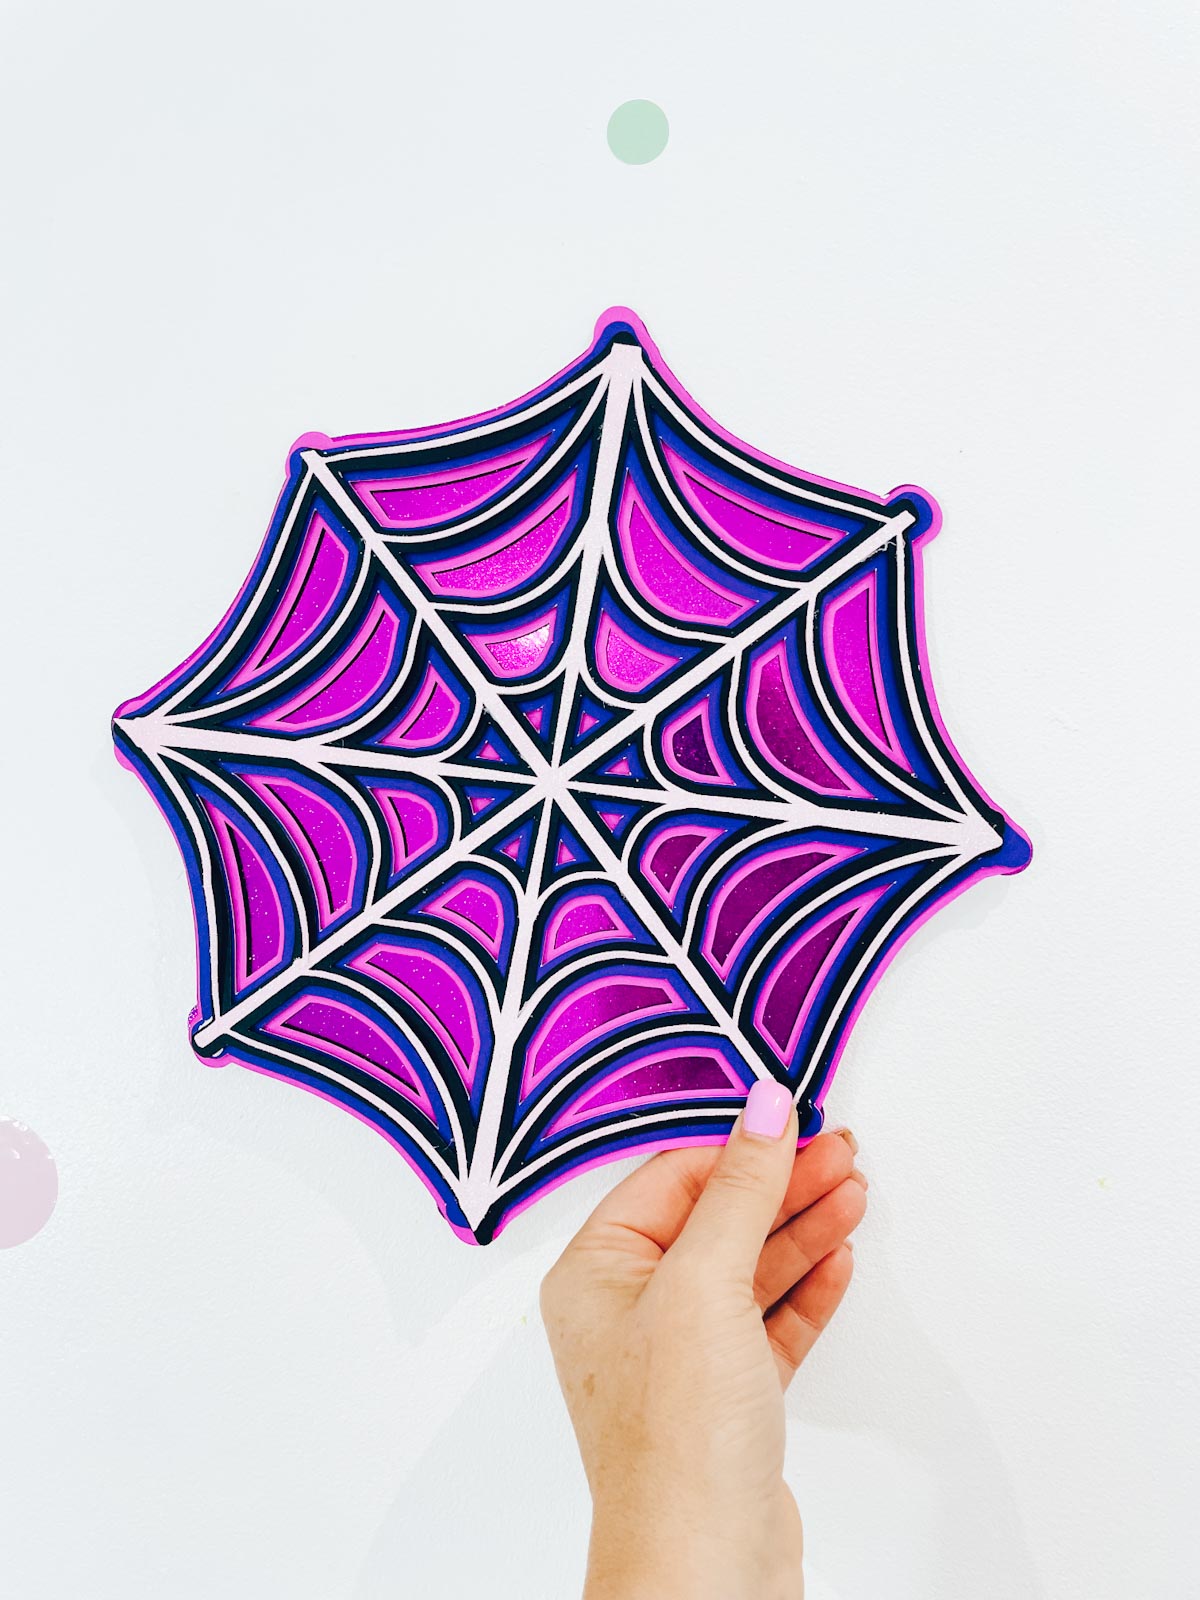 Spider Web Layered SVG for Halloween Crafting and Decor